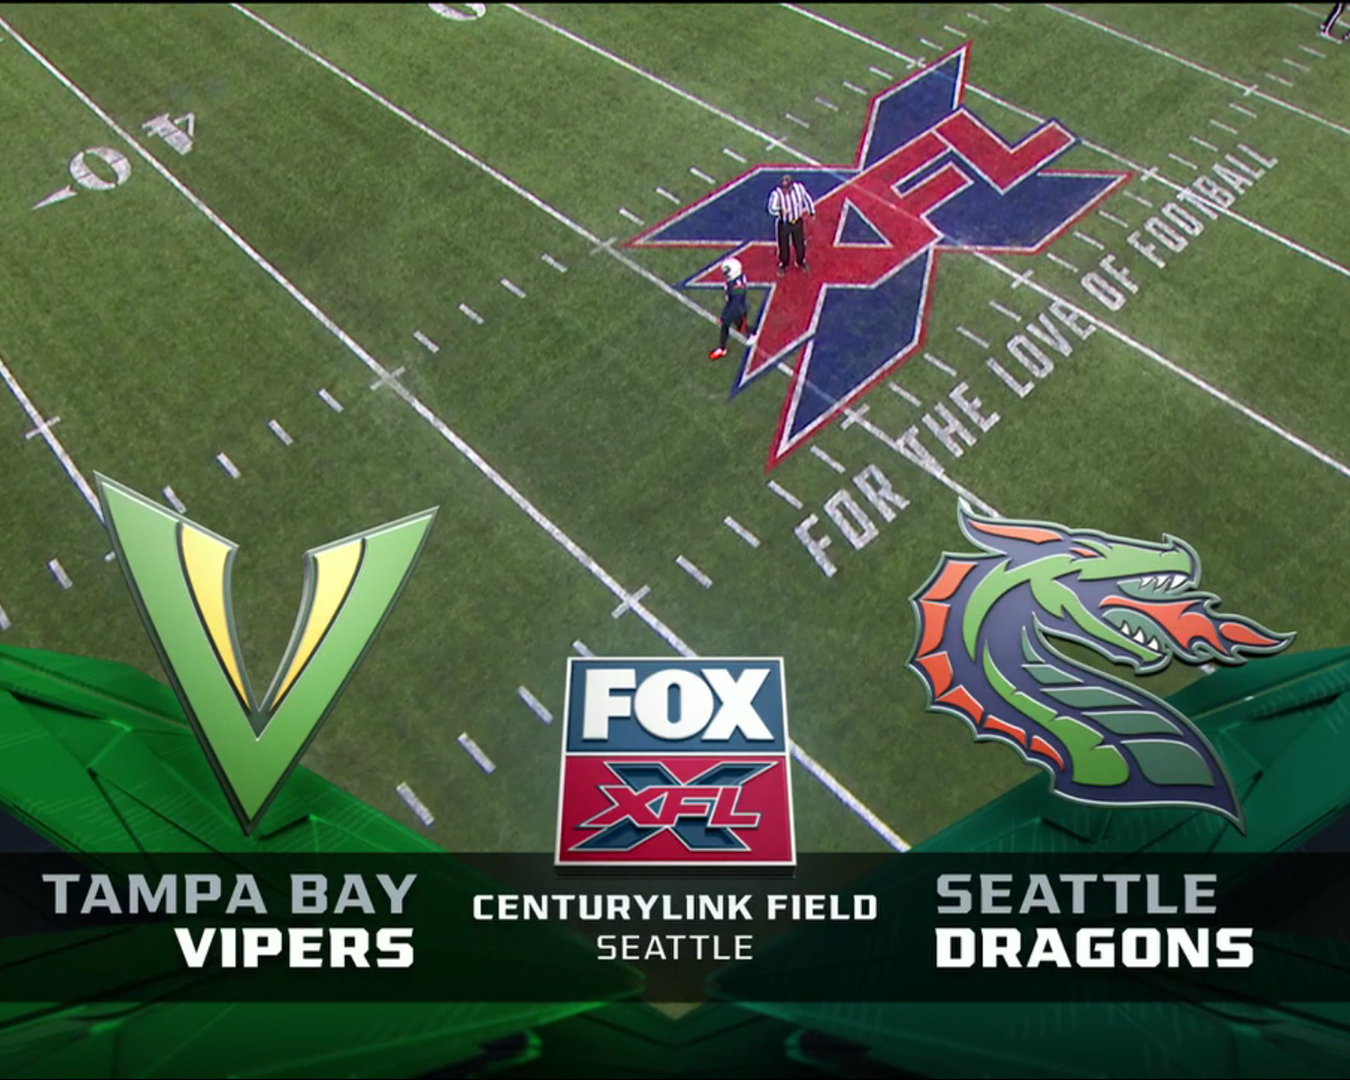 VTF League in use by XFL on FOX